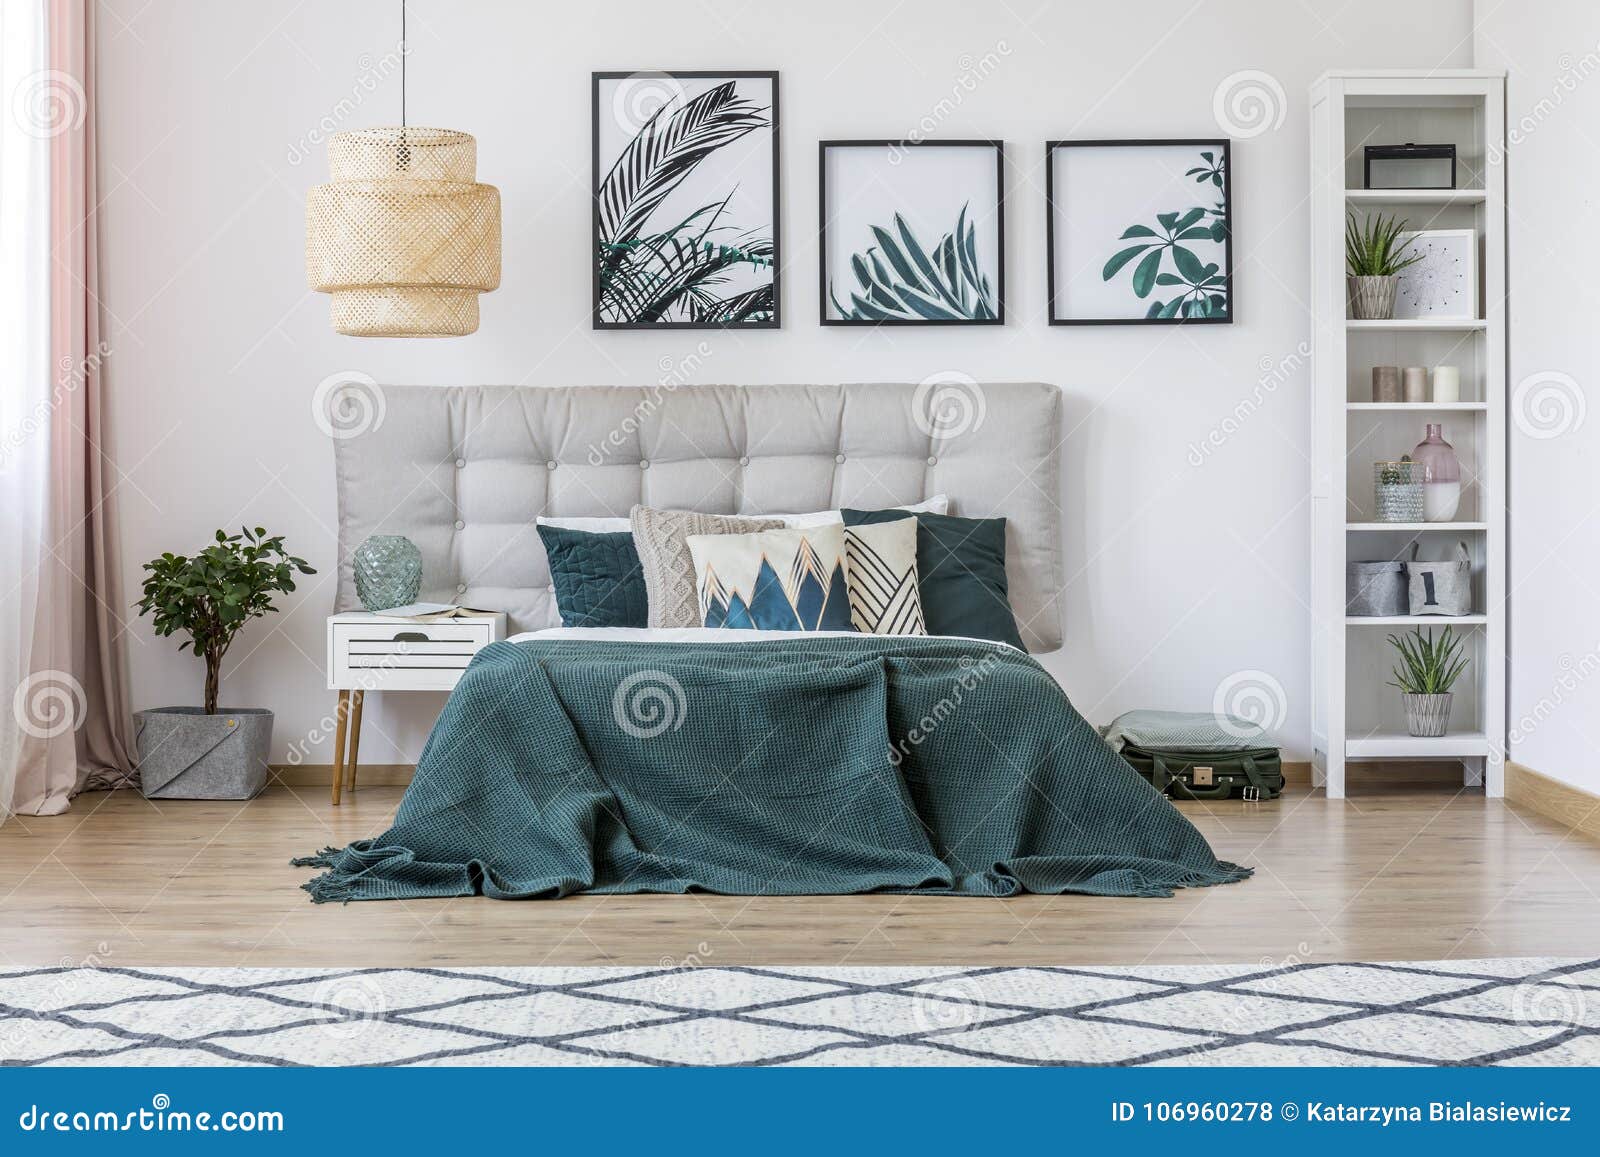 Rattan Lamp In Green Bedroom Stock Photo Image Of Cushions